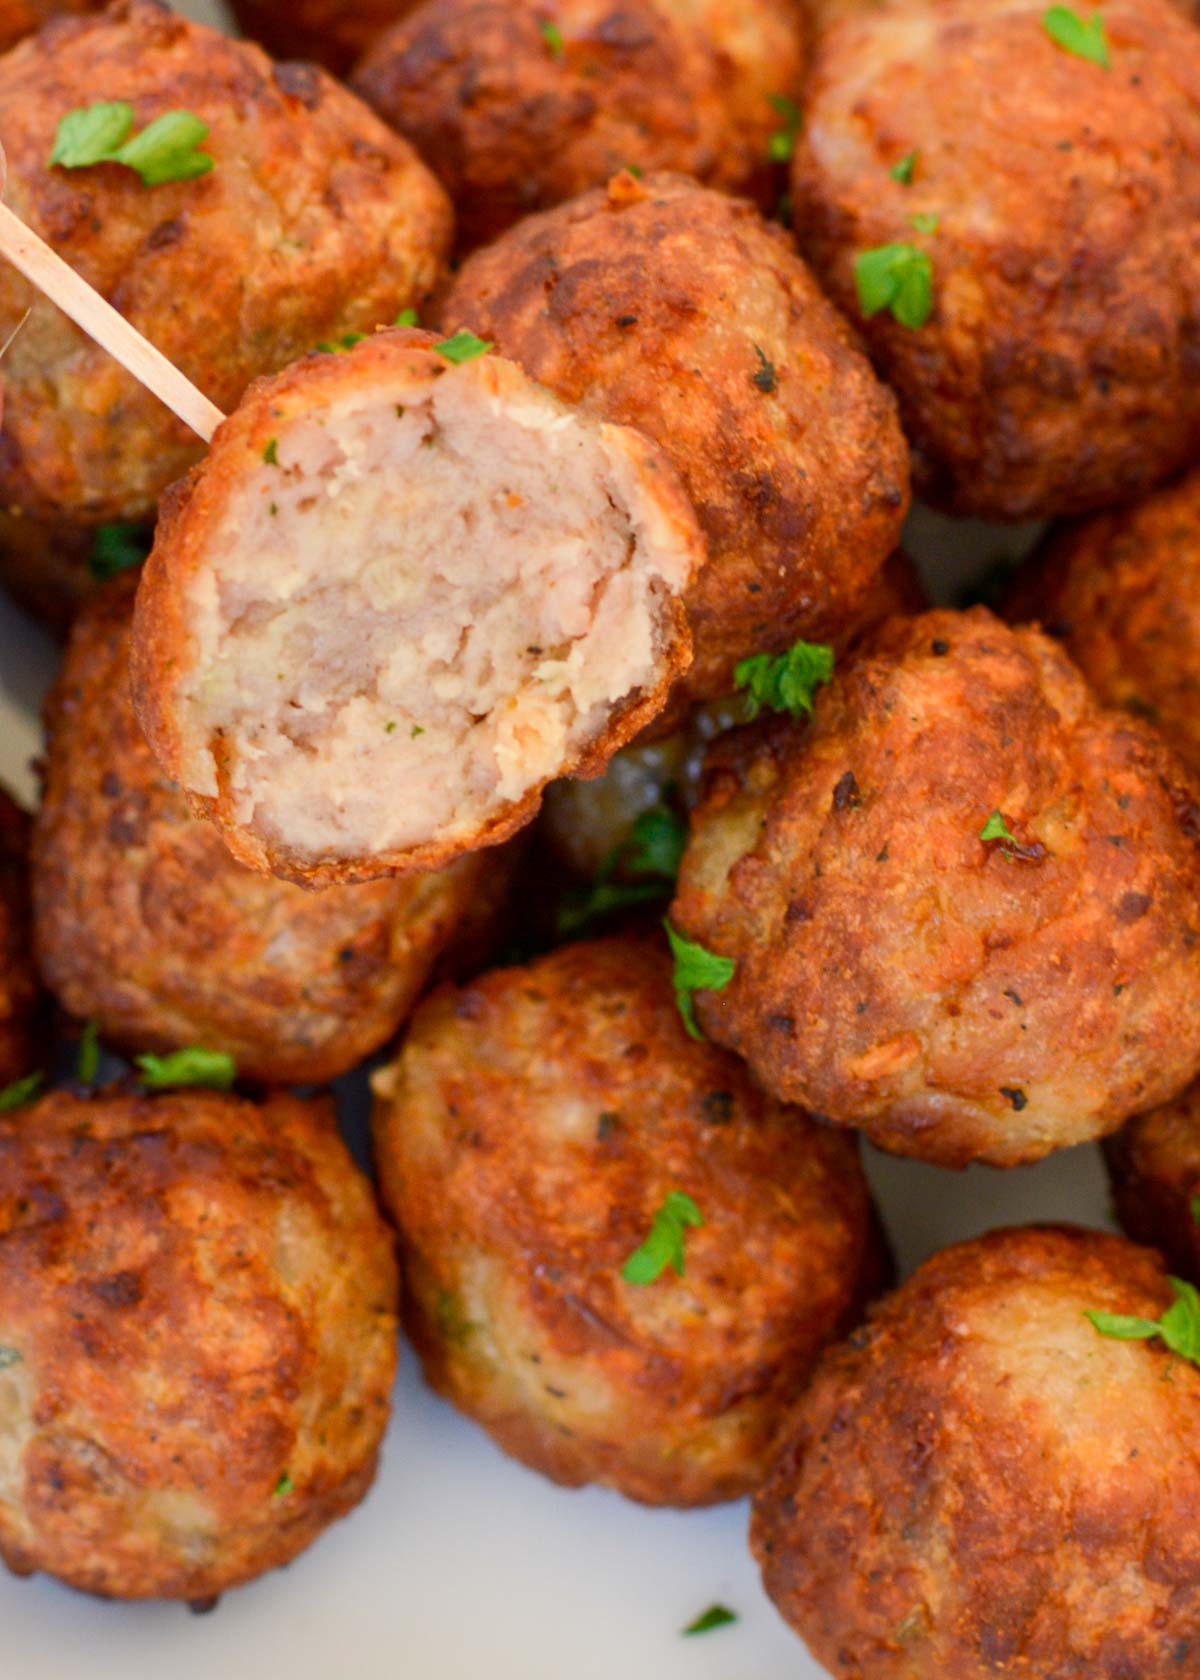 Learn how to cook frozen meatballs in the air fryer for an easy appetizer or meal! The 2-ingredient sauce is simple and delicious.